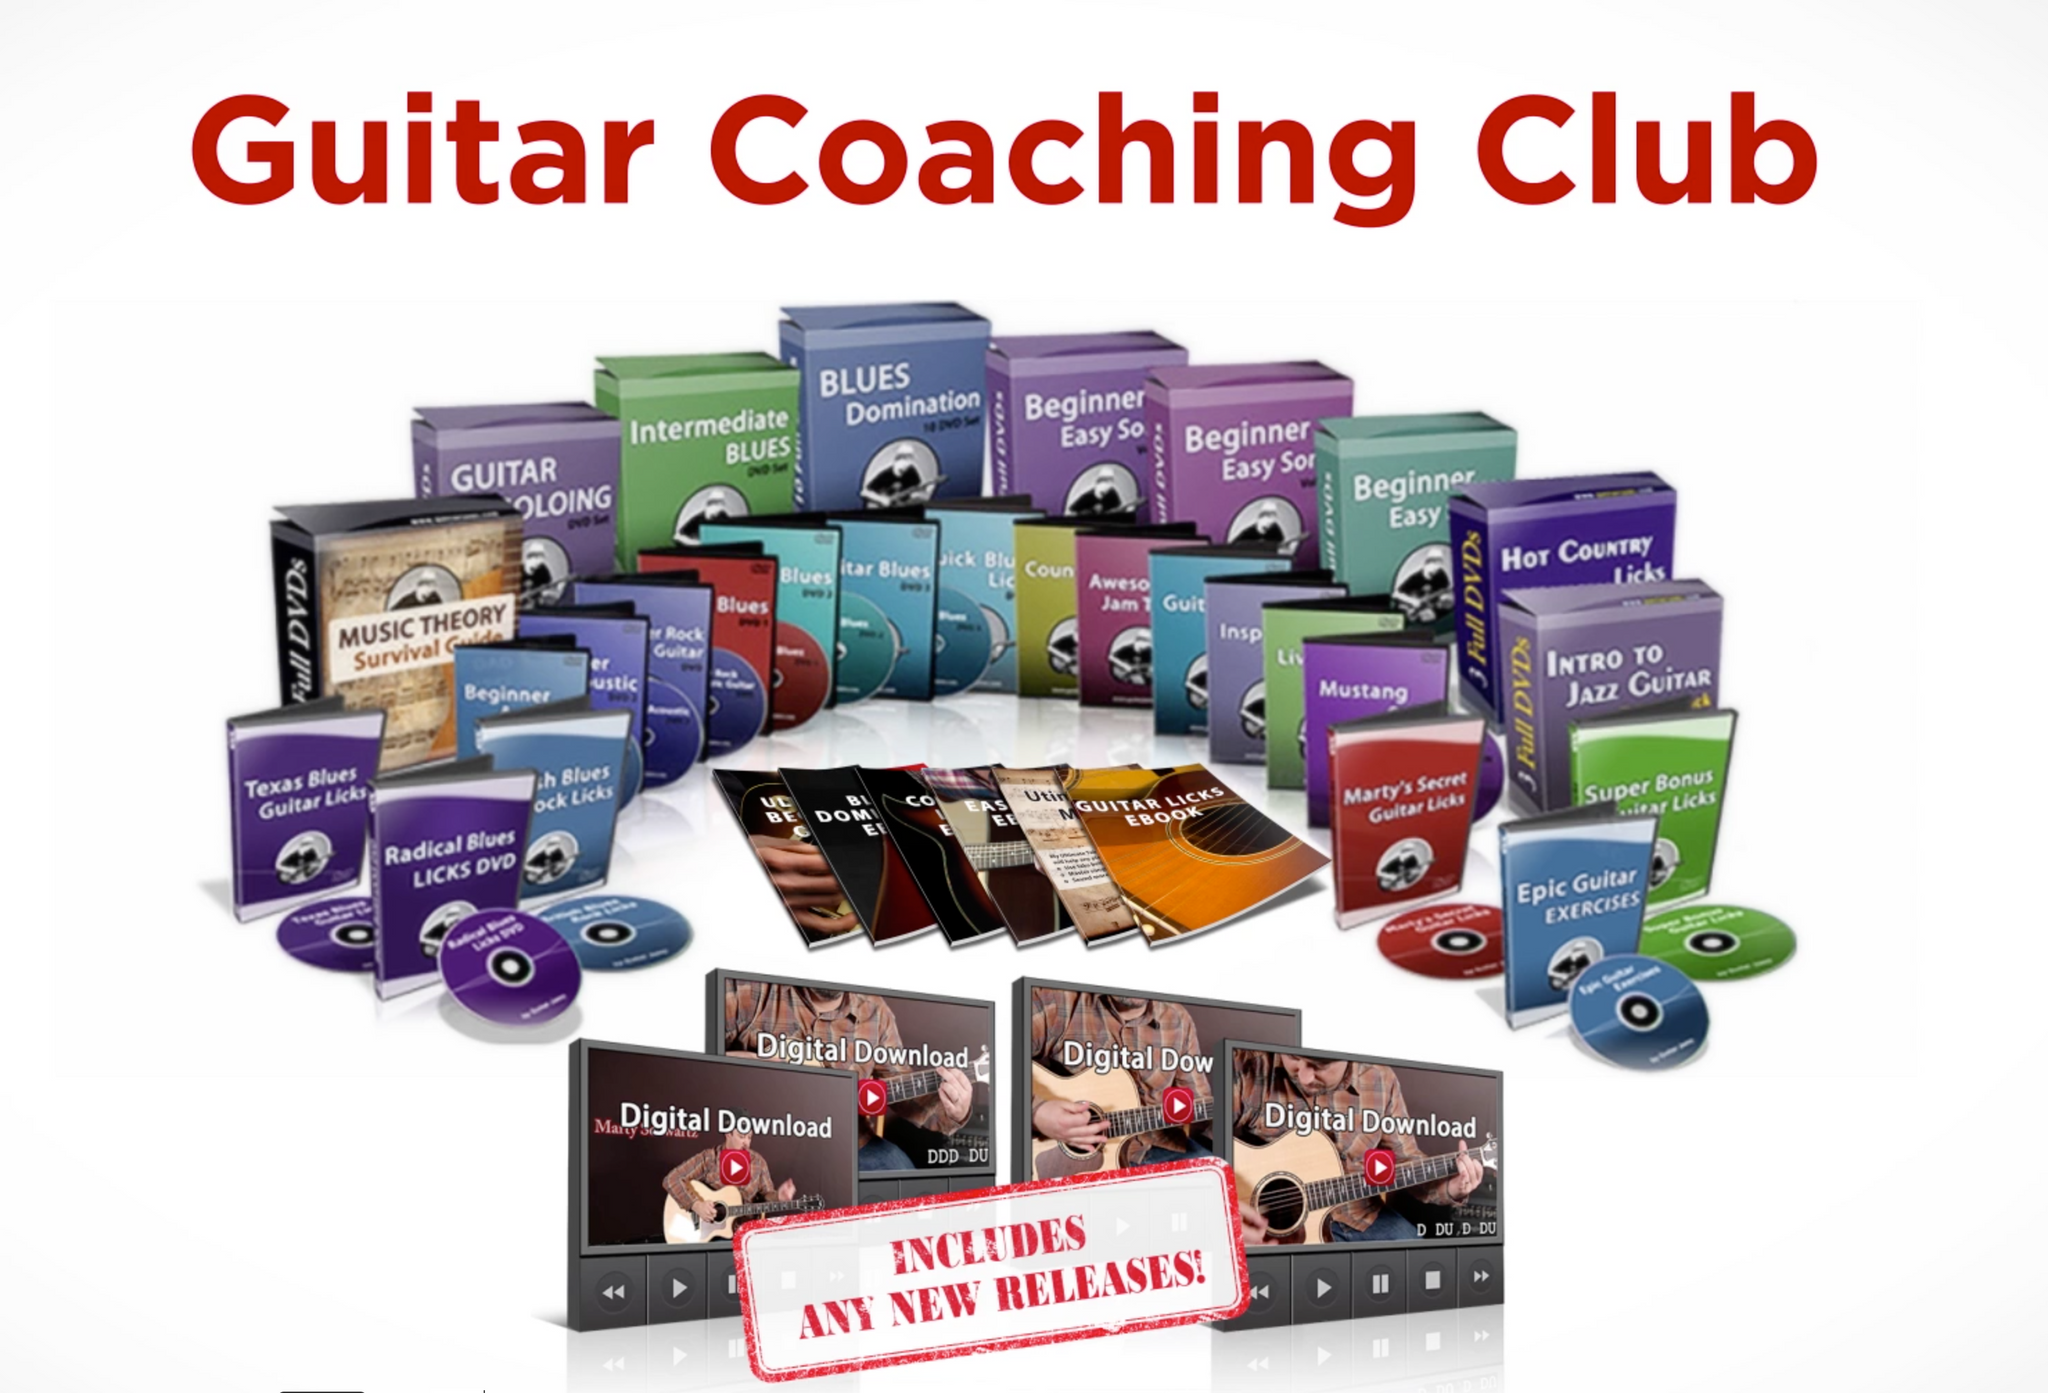 SPECIAL: GuitarJamz's Guitar Coaching Club with LIFETIME Membership - You get EVERYTHING!